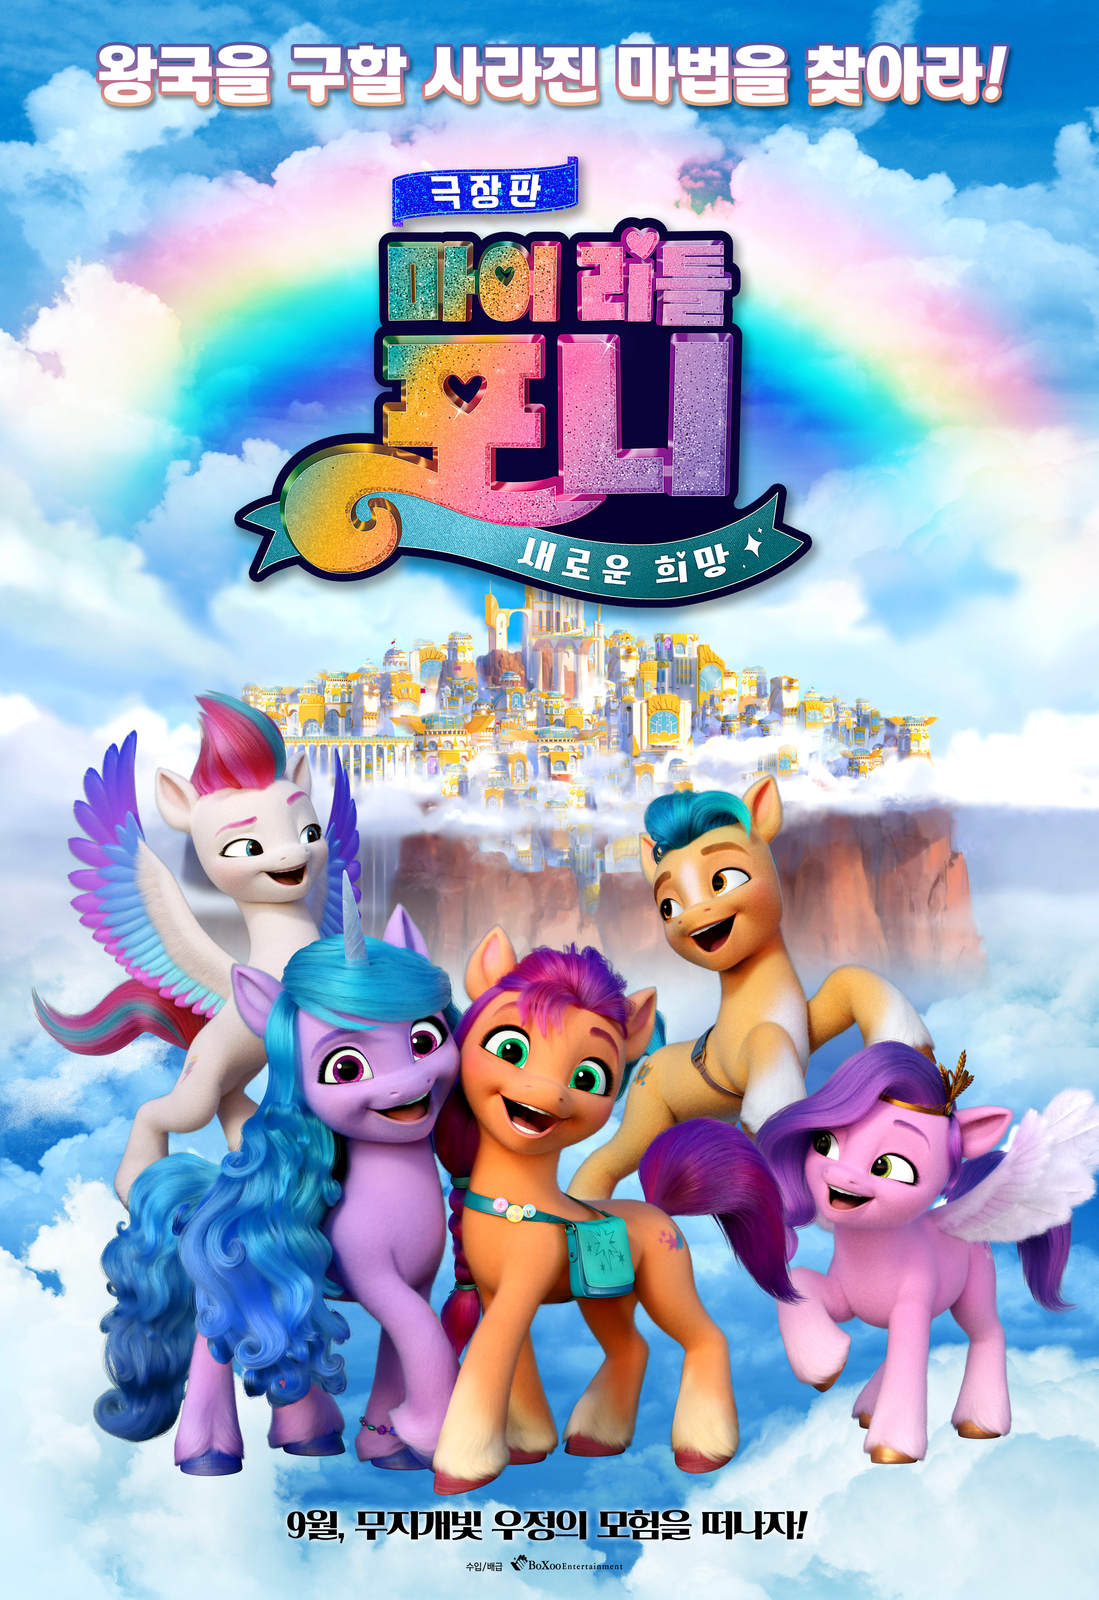 My Little Pony A New Generation Poster Animated Movie 24x36 27x40 Art Film Print